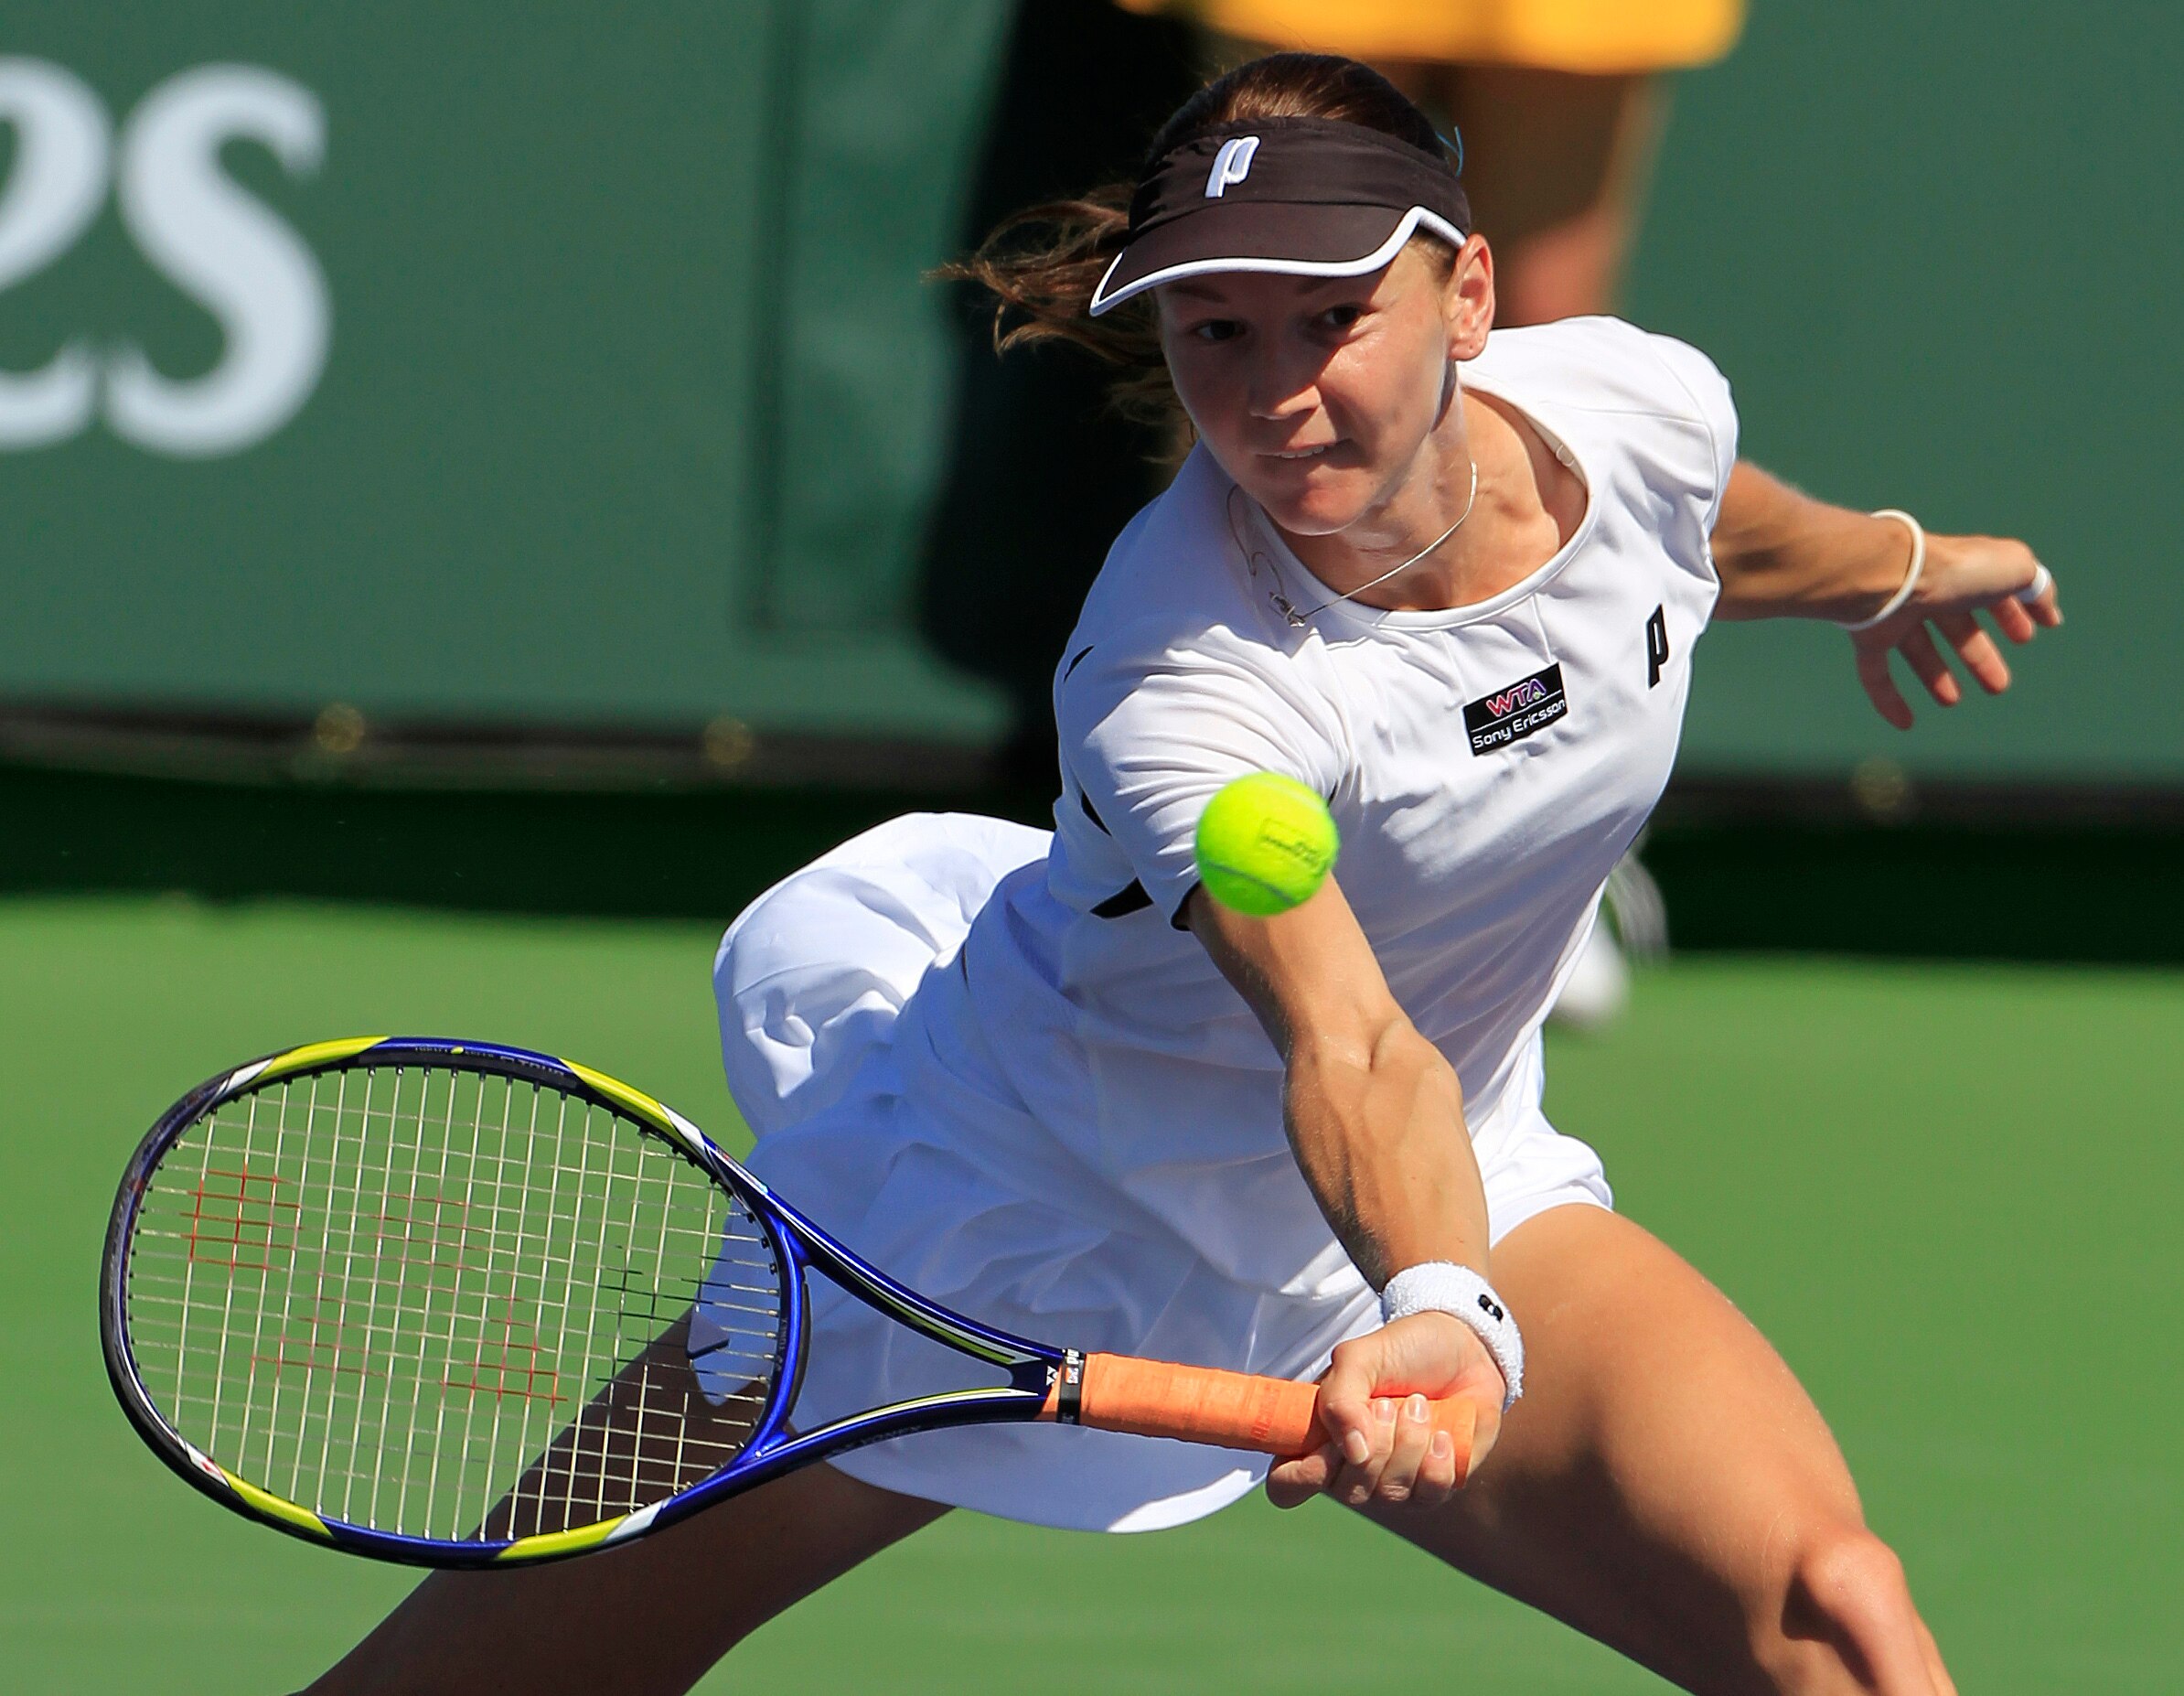 FILE - Renata Voracova of the Czech Republic returns a shot to Shuai Peng of China during a first round match at the BNP Paribas Open tennis tournament in Indian Wells, Calif., on March 10, 2011. The Australian Broadcasting Corp. reported later Friday, Ja